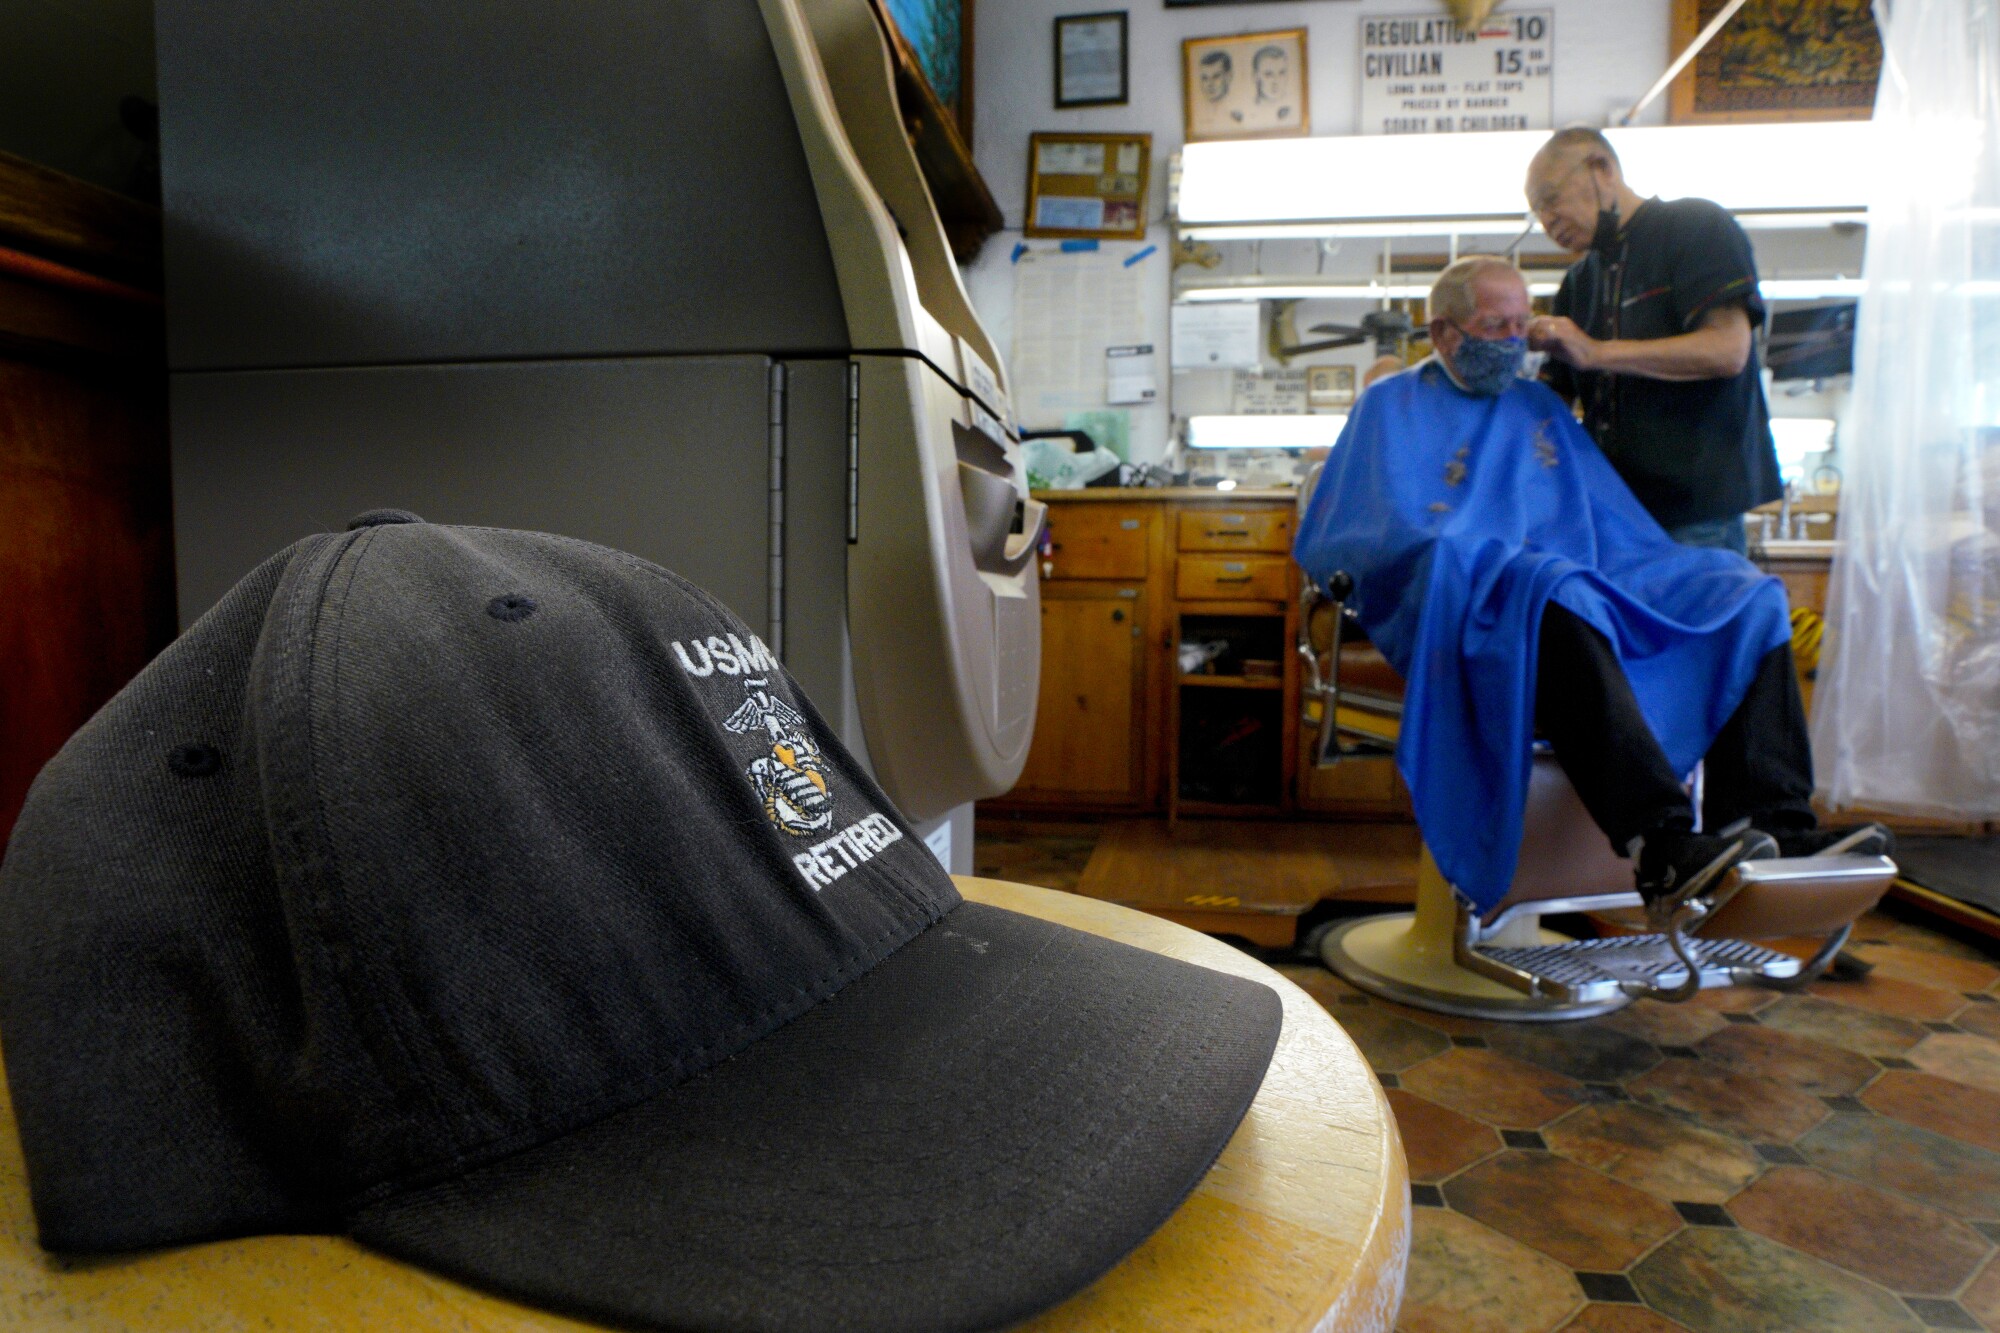 A barber gives a haircut to a customer in a chair